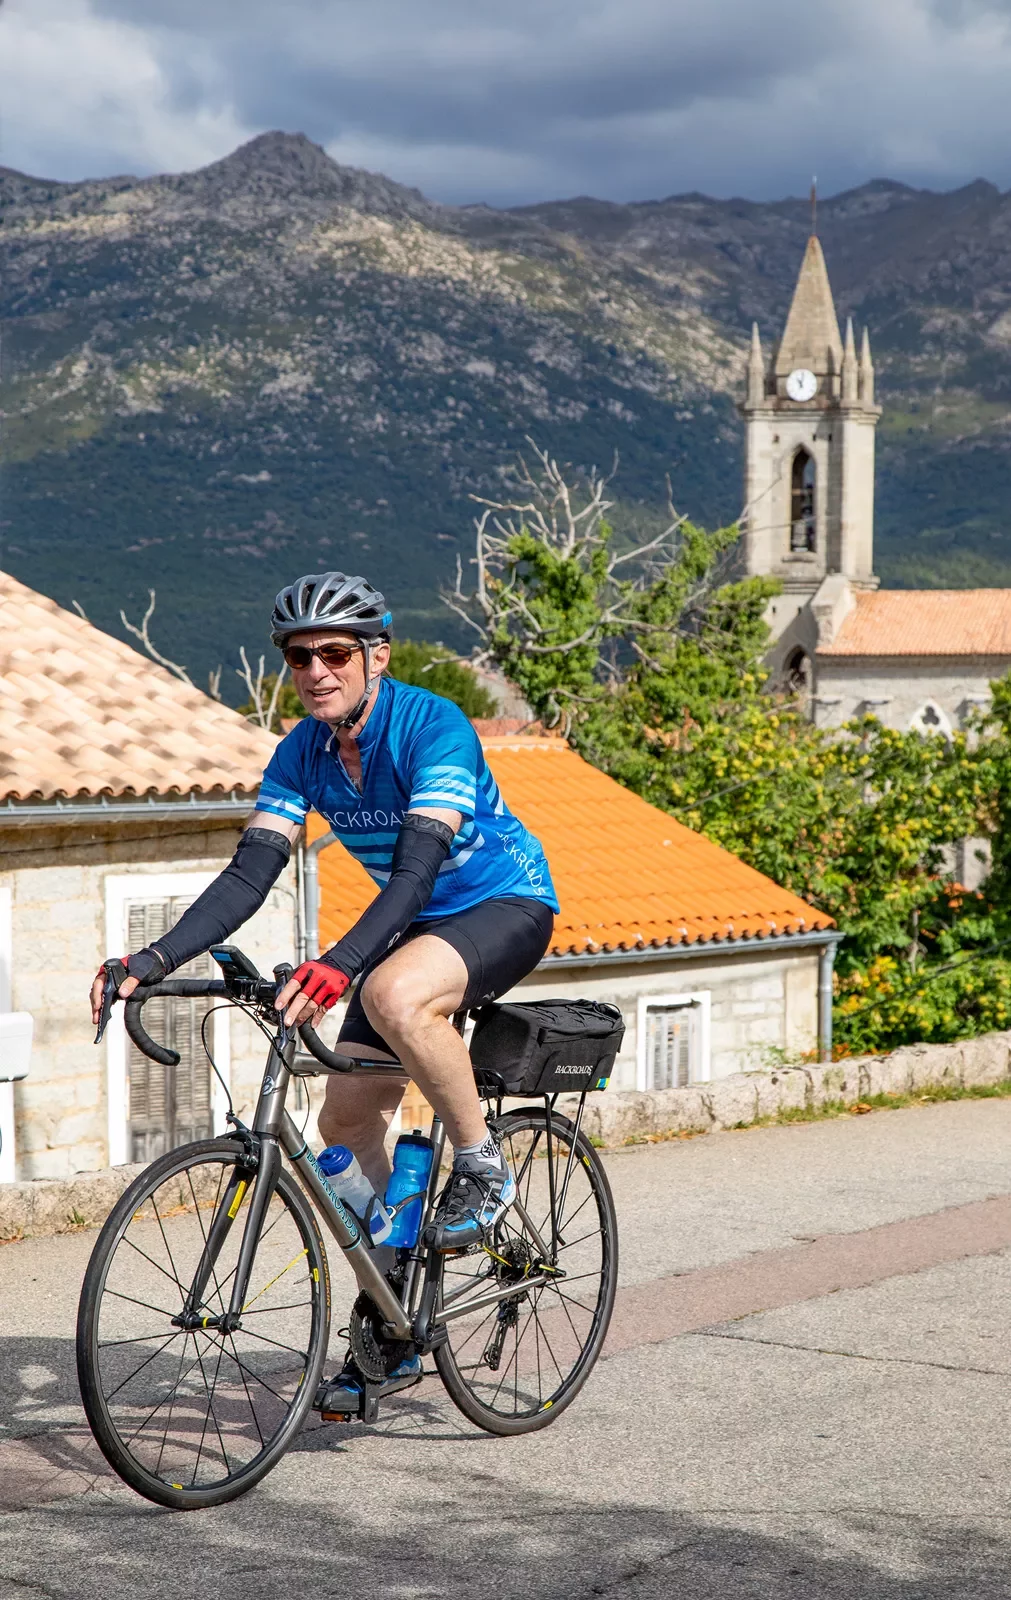 Guest cycling in Italian village, clock tower in background.